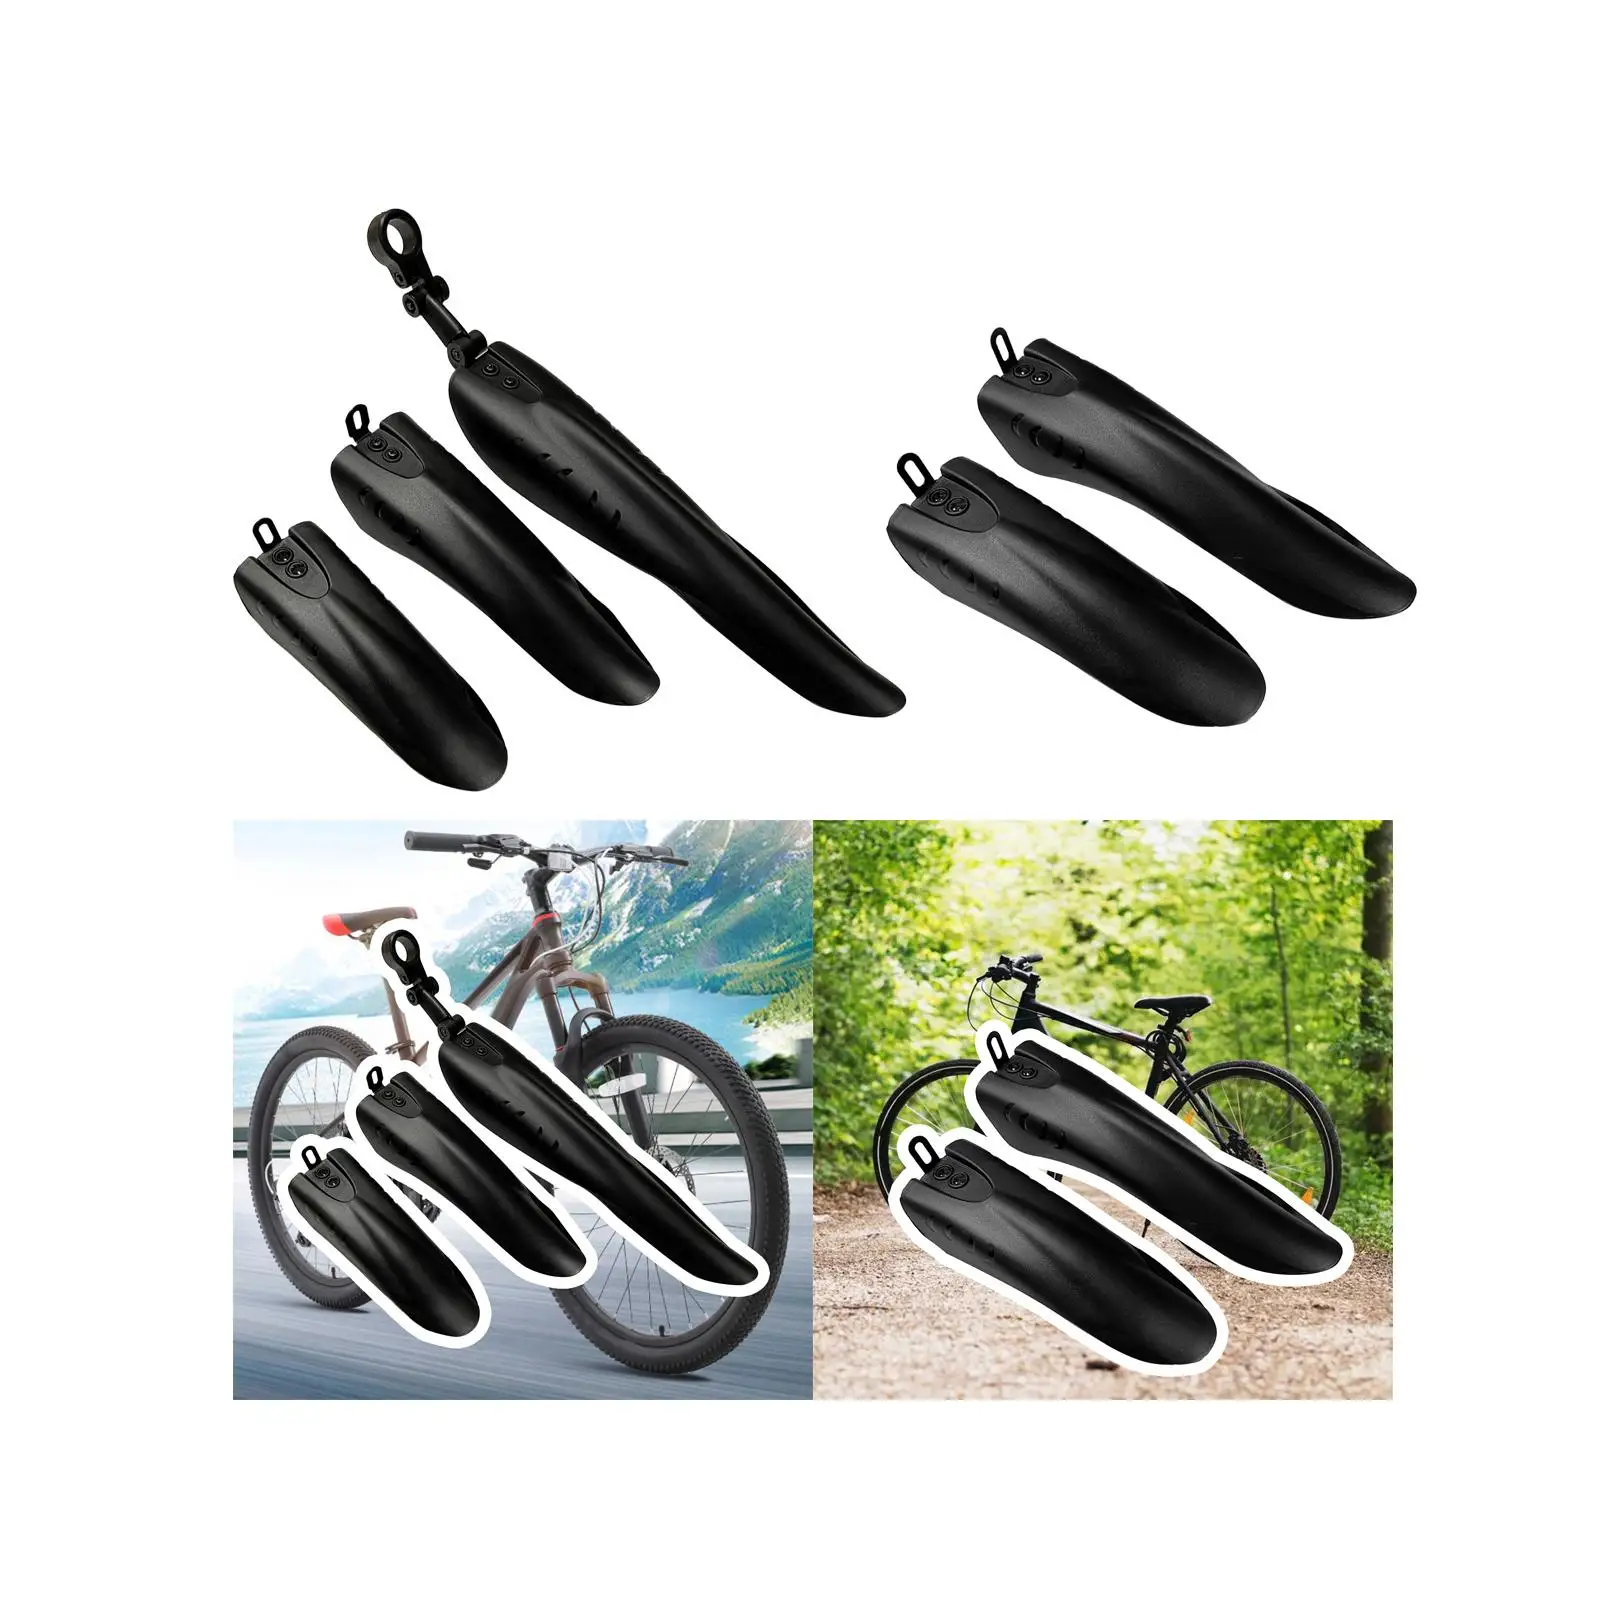 Mountain Bike Mudguard Set Mudflap Replace Accs Components Practical Mud Guard Fenders for Outdoor Sports